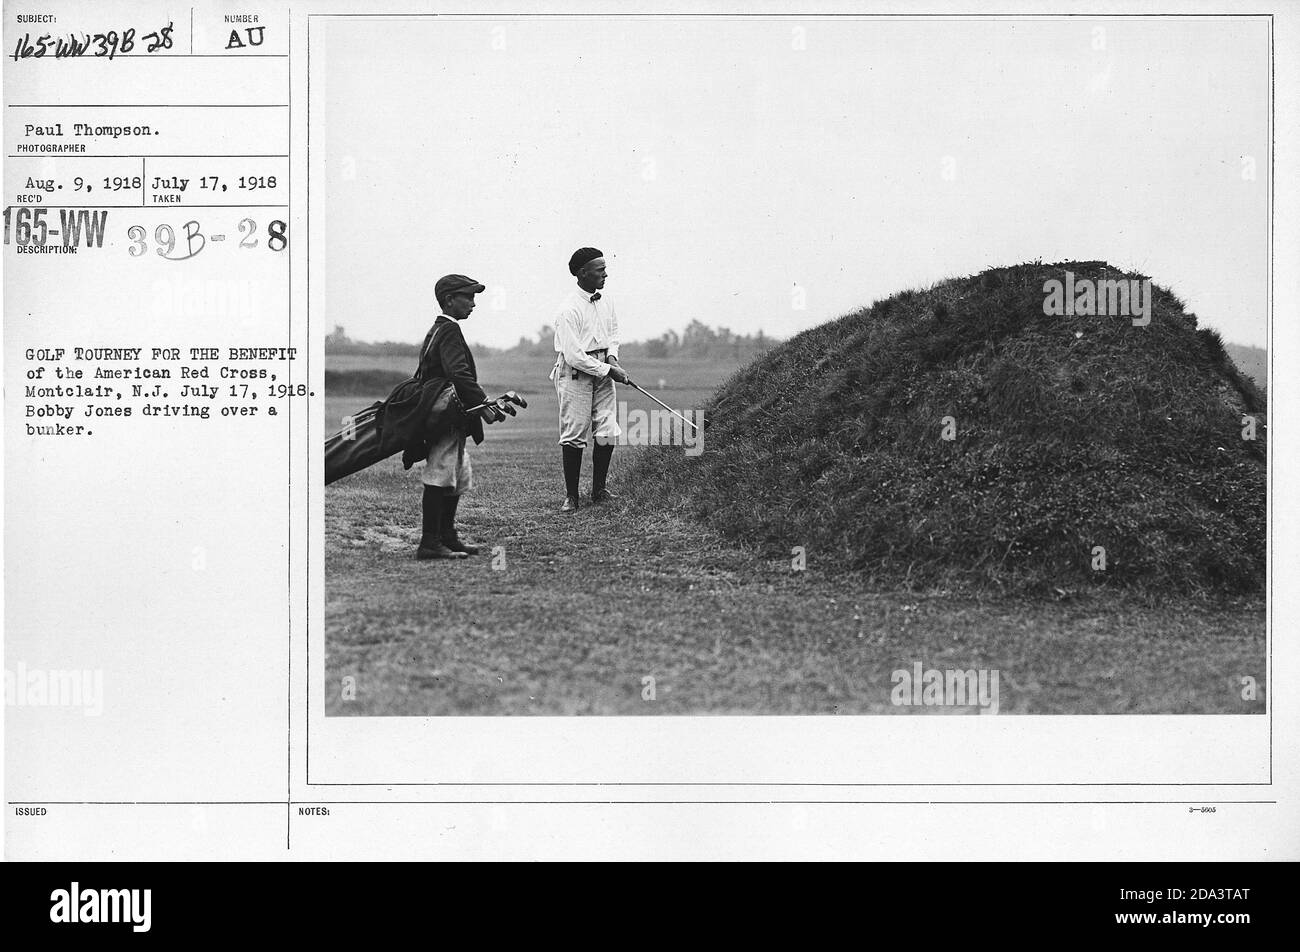 Golf Tourney for the benefit of the American Red Cross, Montclair, N.J., July 17, 1918. Bobby Jones driving over a Bunker  Stockfoto